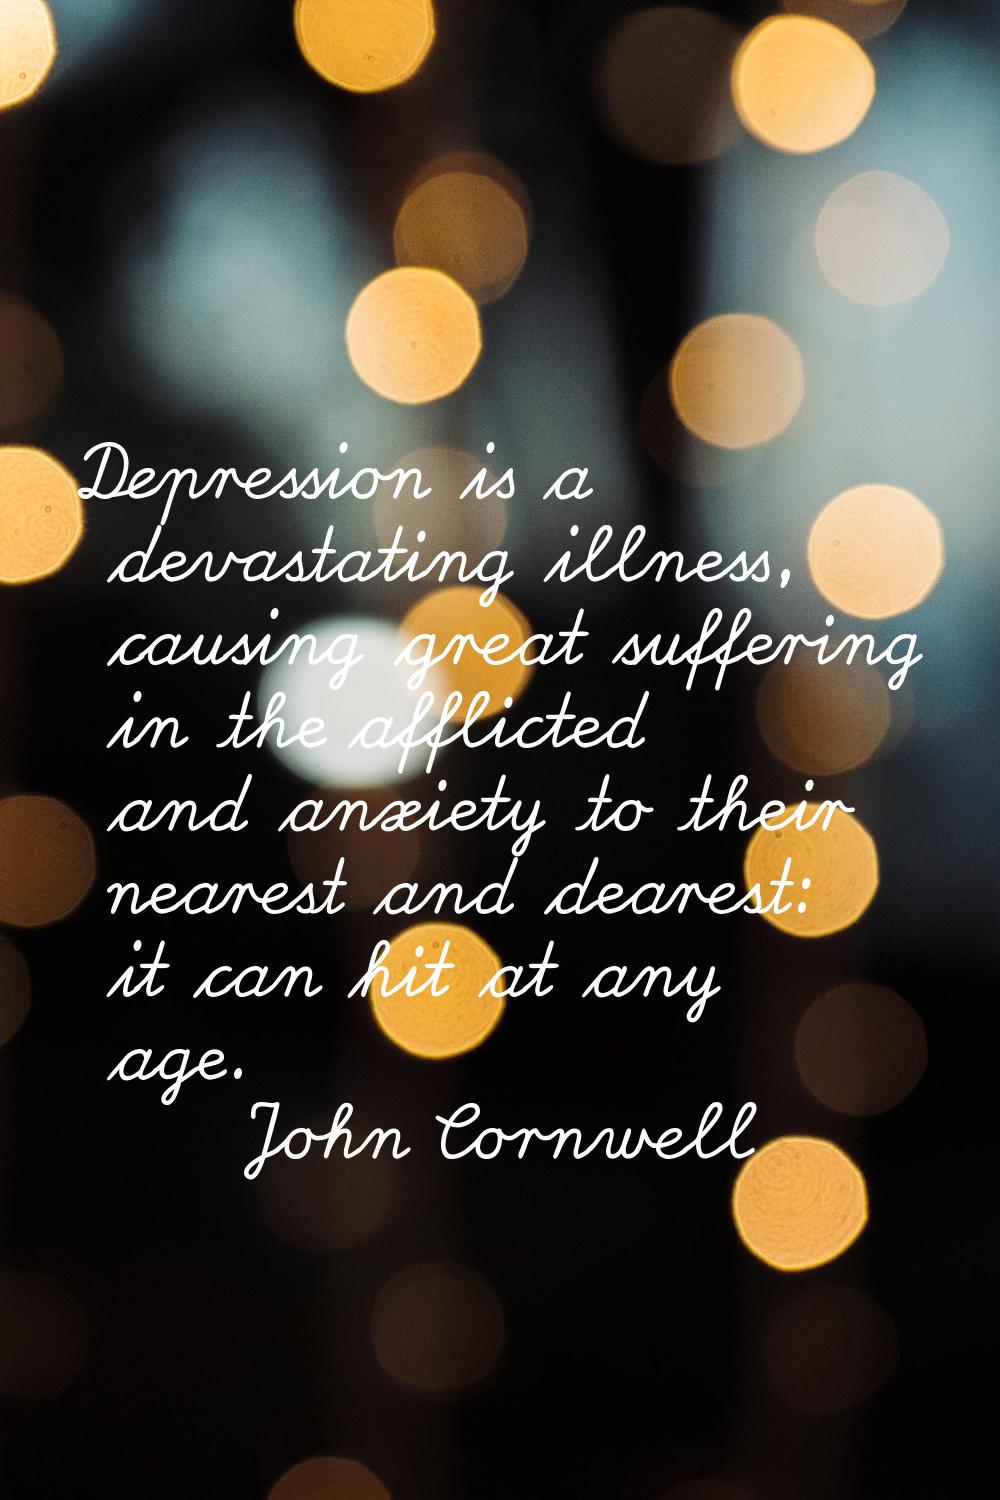 Depression is a devastating illness, causing great suffering in the afflicted and anxiety to their 